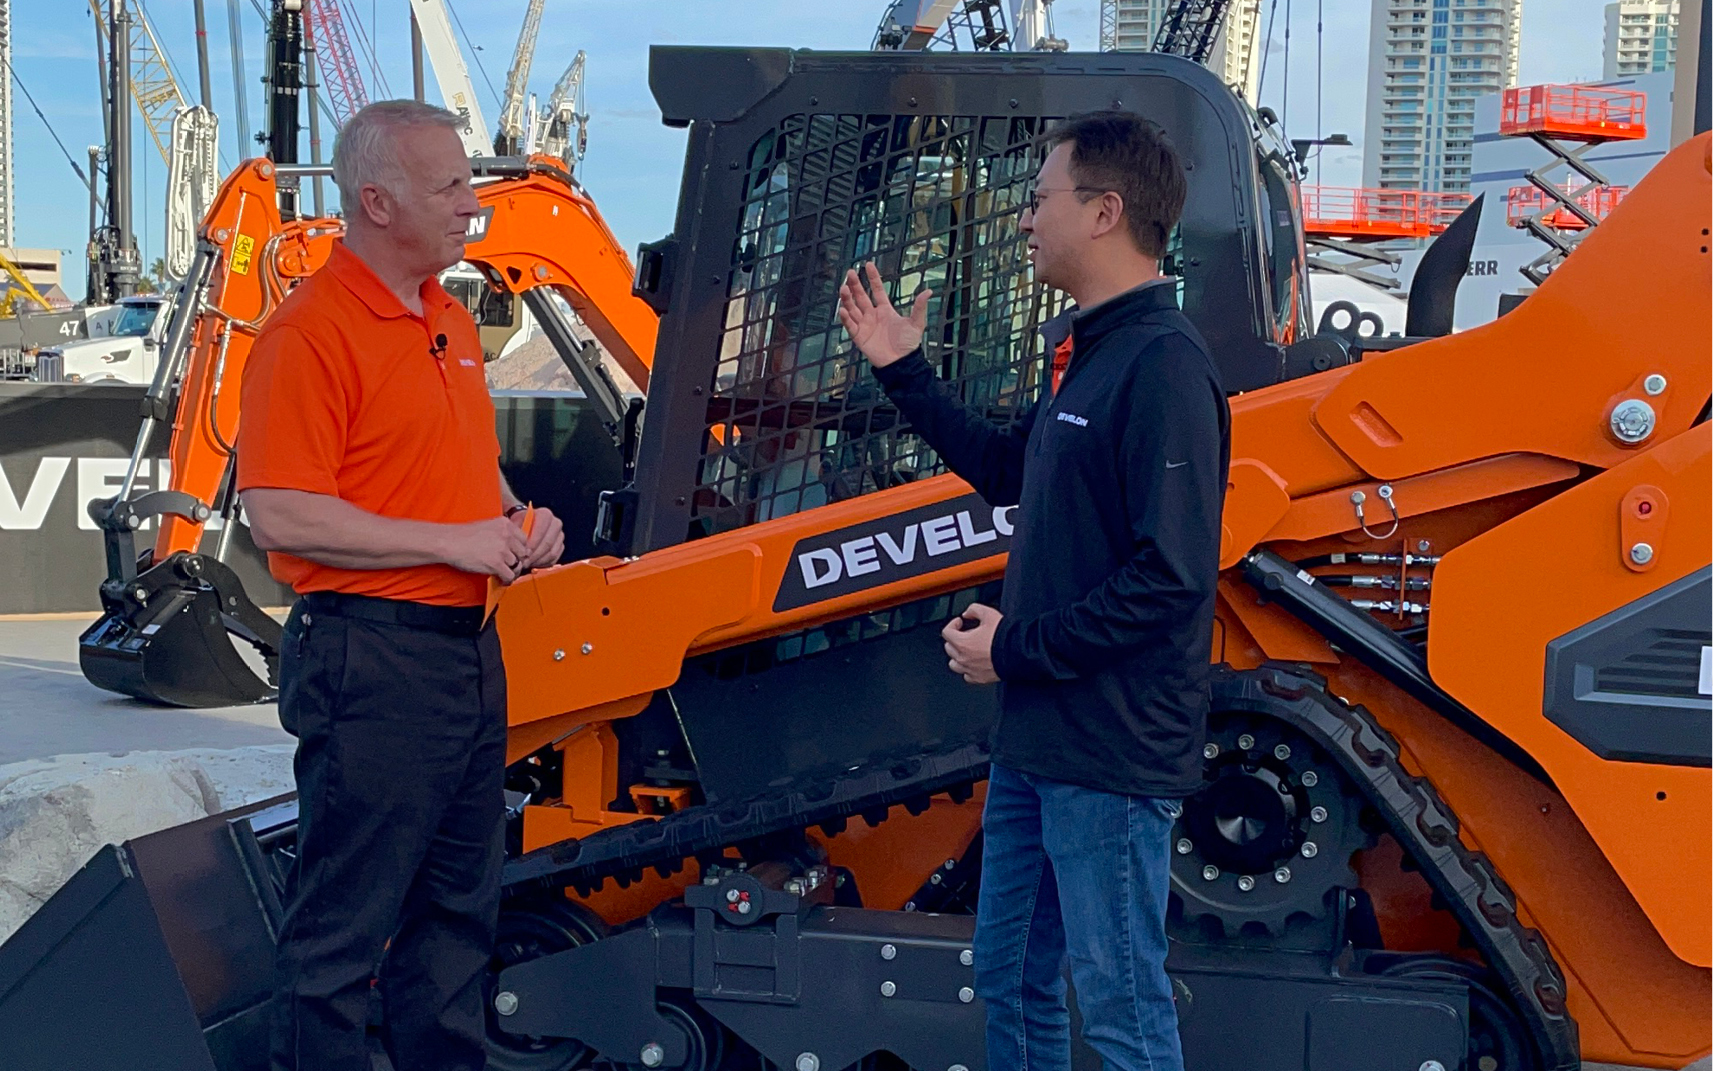 Scott Hoke interviews Thomas Lee of DEVELON about the features and benefits of the new compact track loader at CONEXPO-CON/AGG.